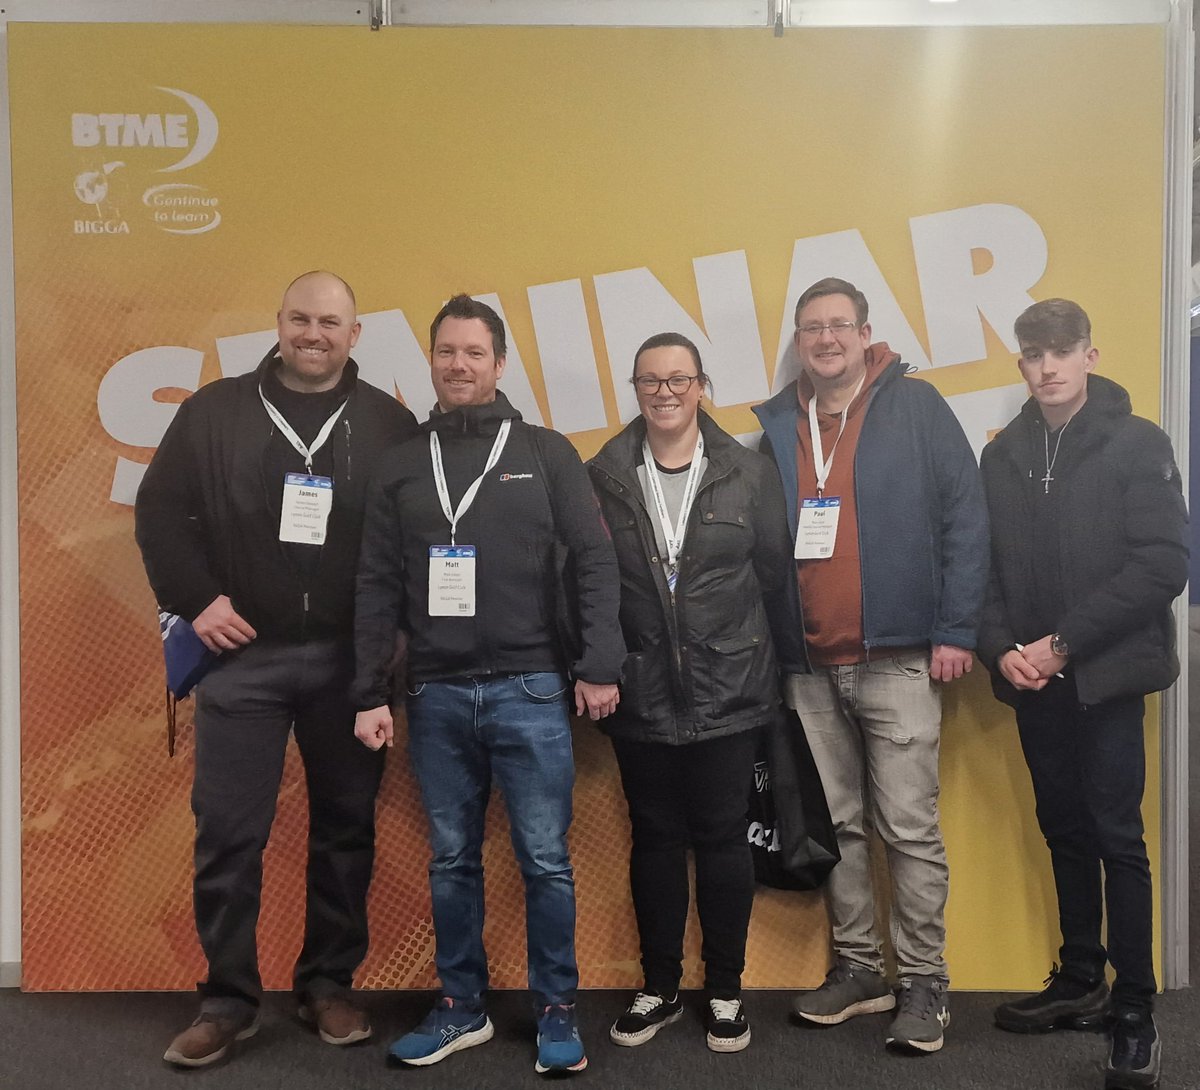 Great day visit by the majority of the staff at #BTME2024 well worth the trip and hope we can stay for longer next year to learn new skills and insights into the turf industry. @BIGGALtd @golfguidehq